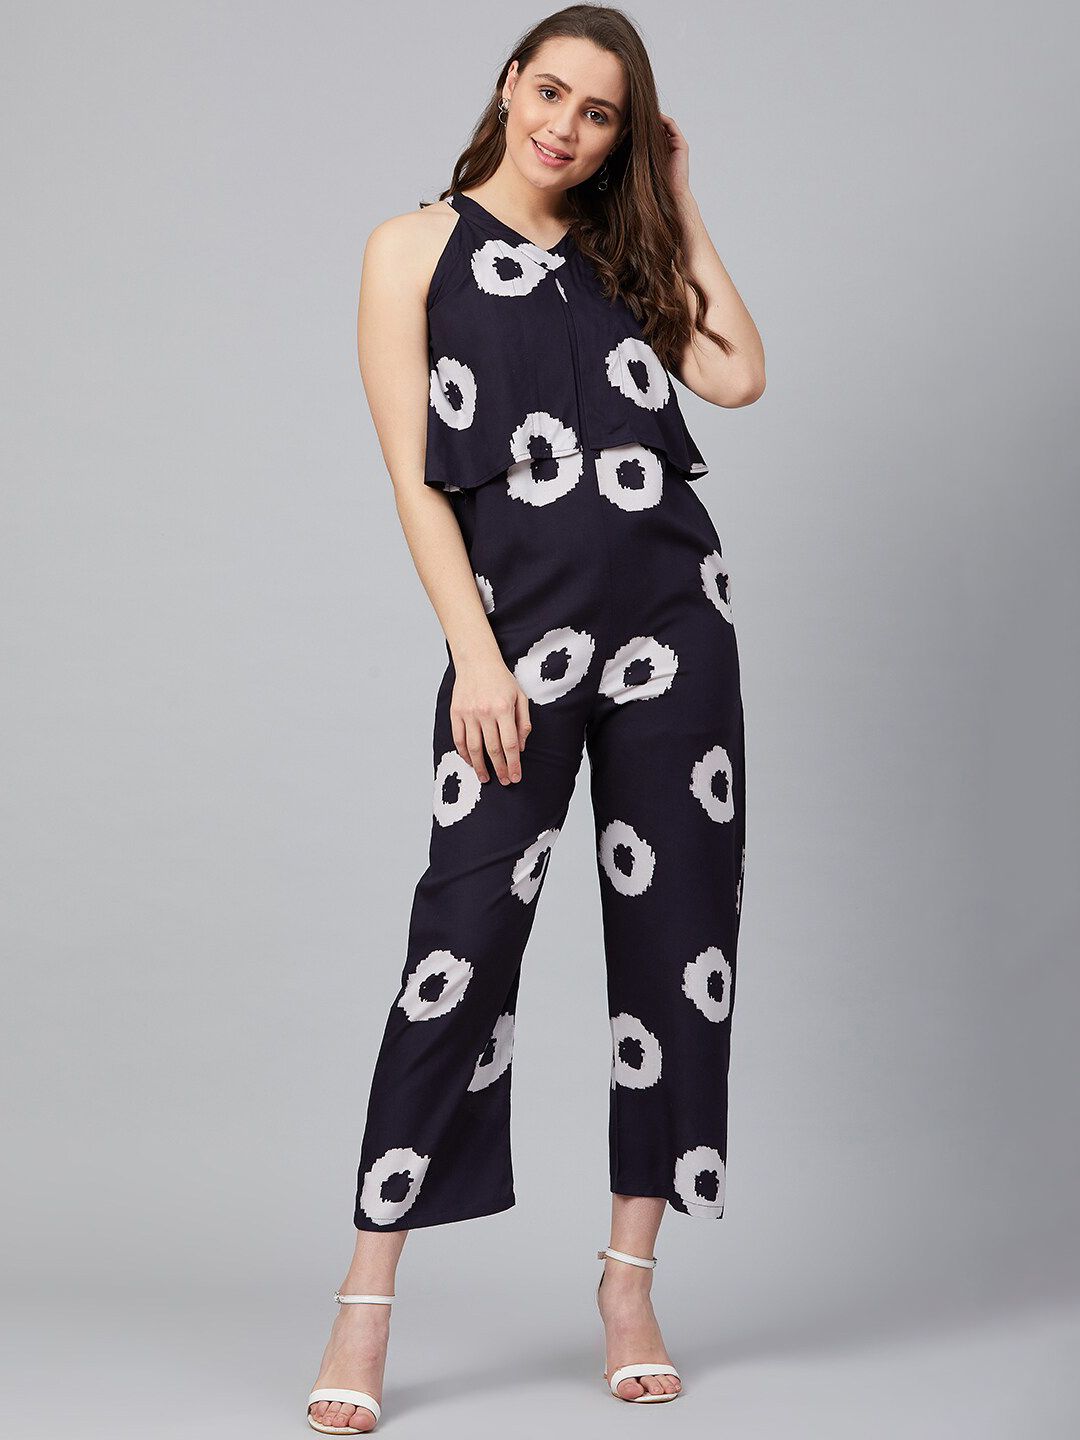 Wabii Navy Blue & White Printed Basic Jumpsuit Price in India